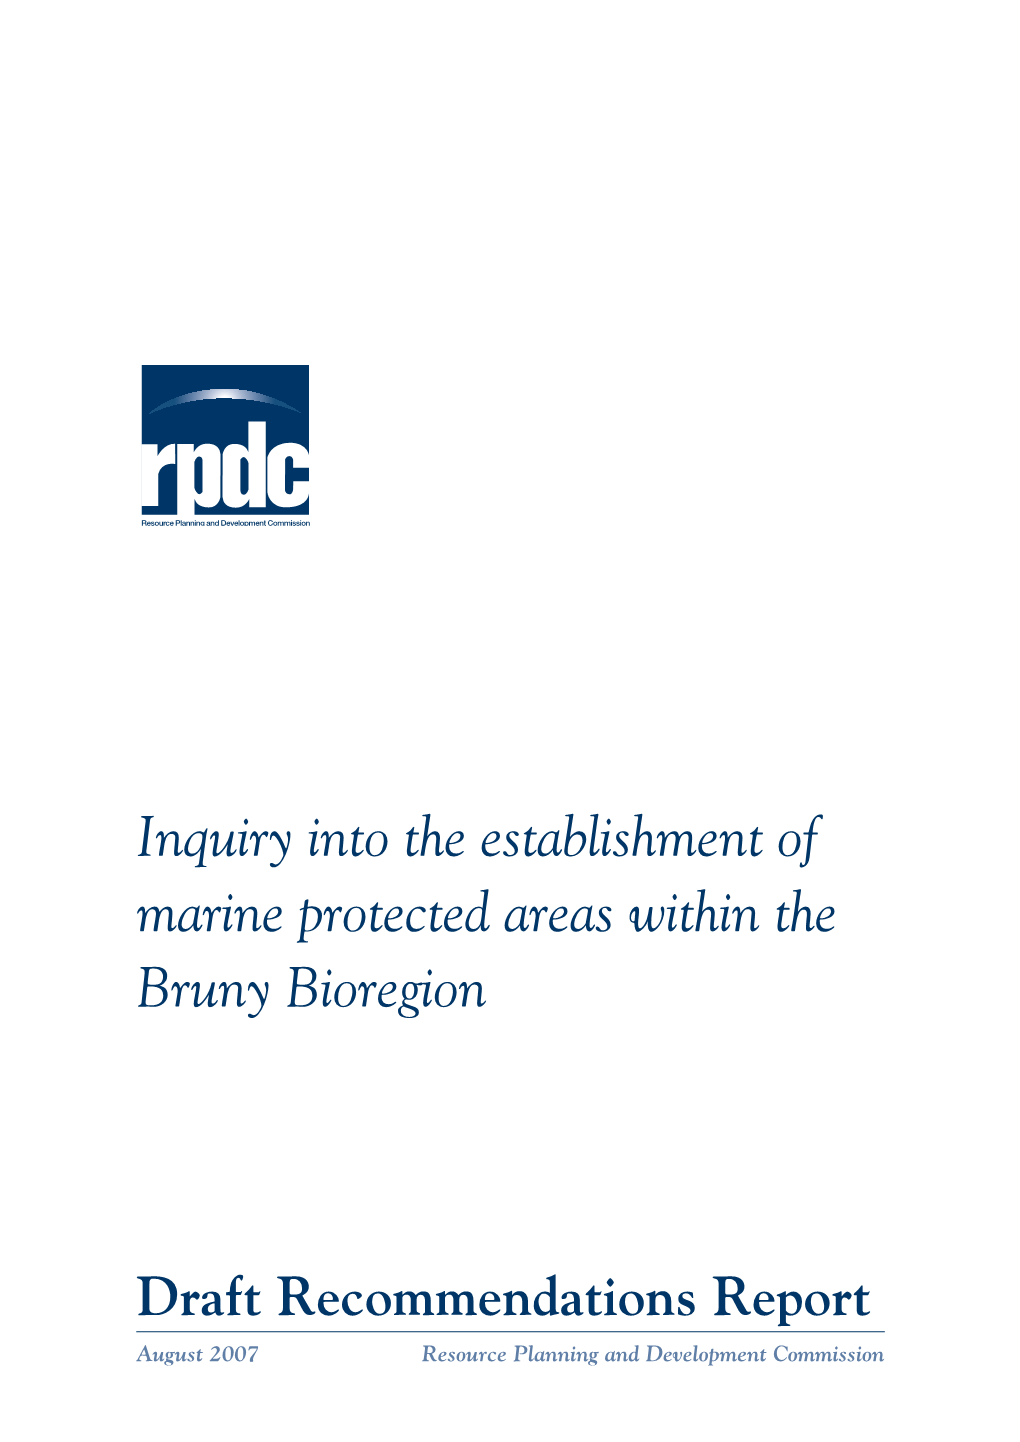 Inquiry Into the Establishment of Marine Protected Areas Within the Bruny Bioregion